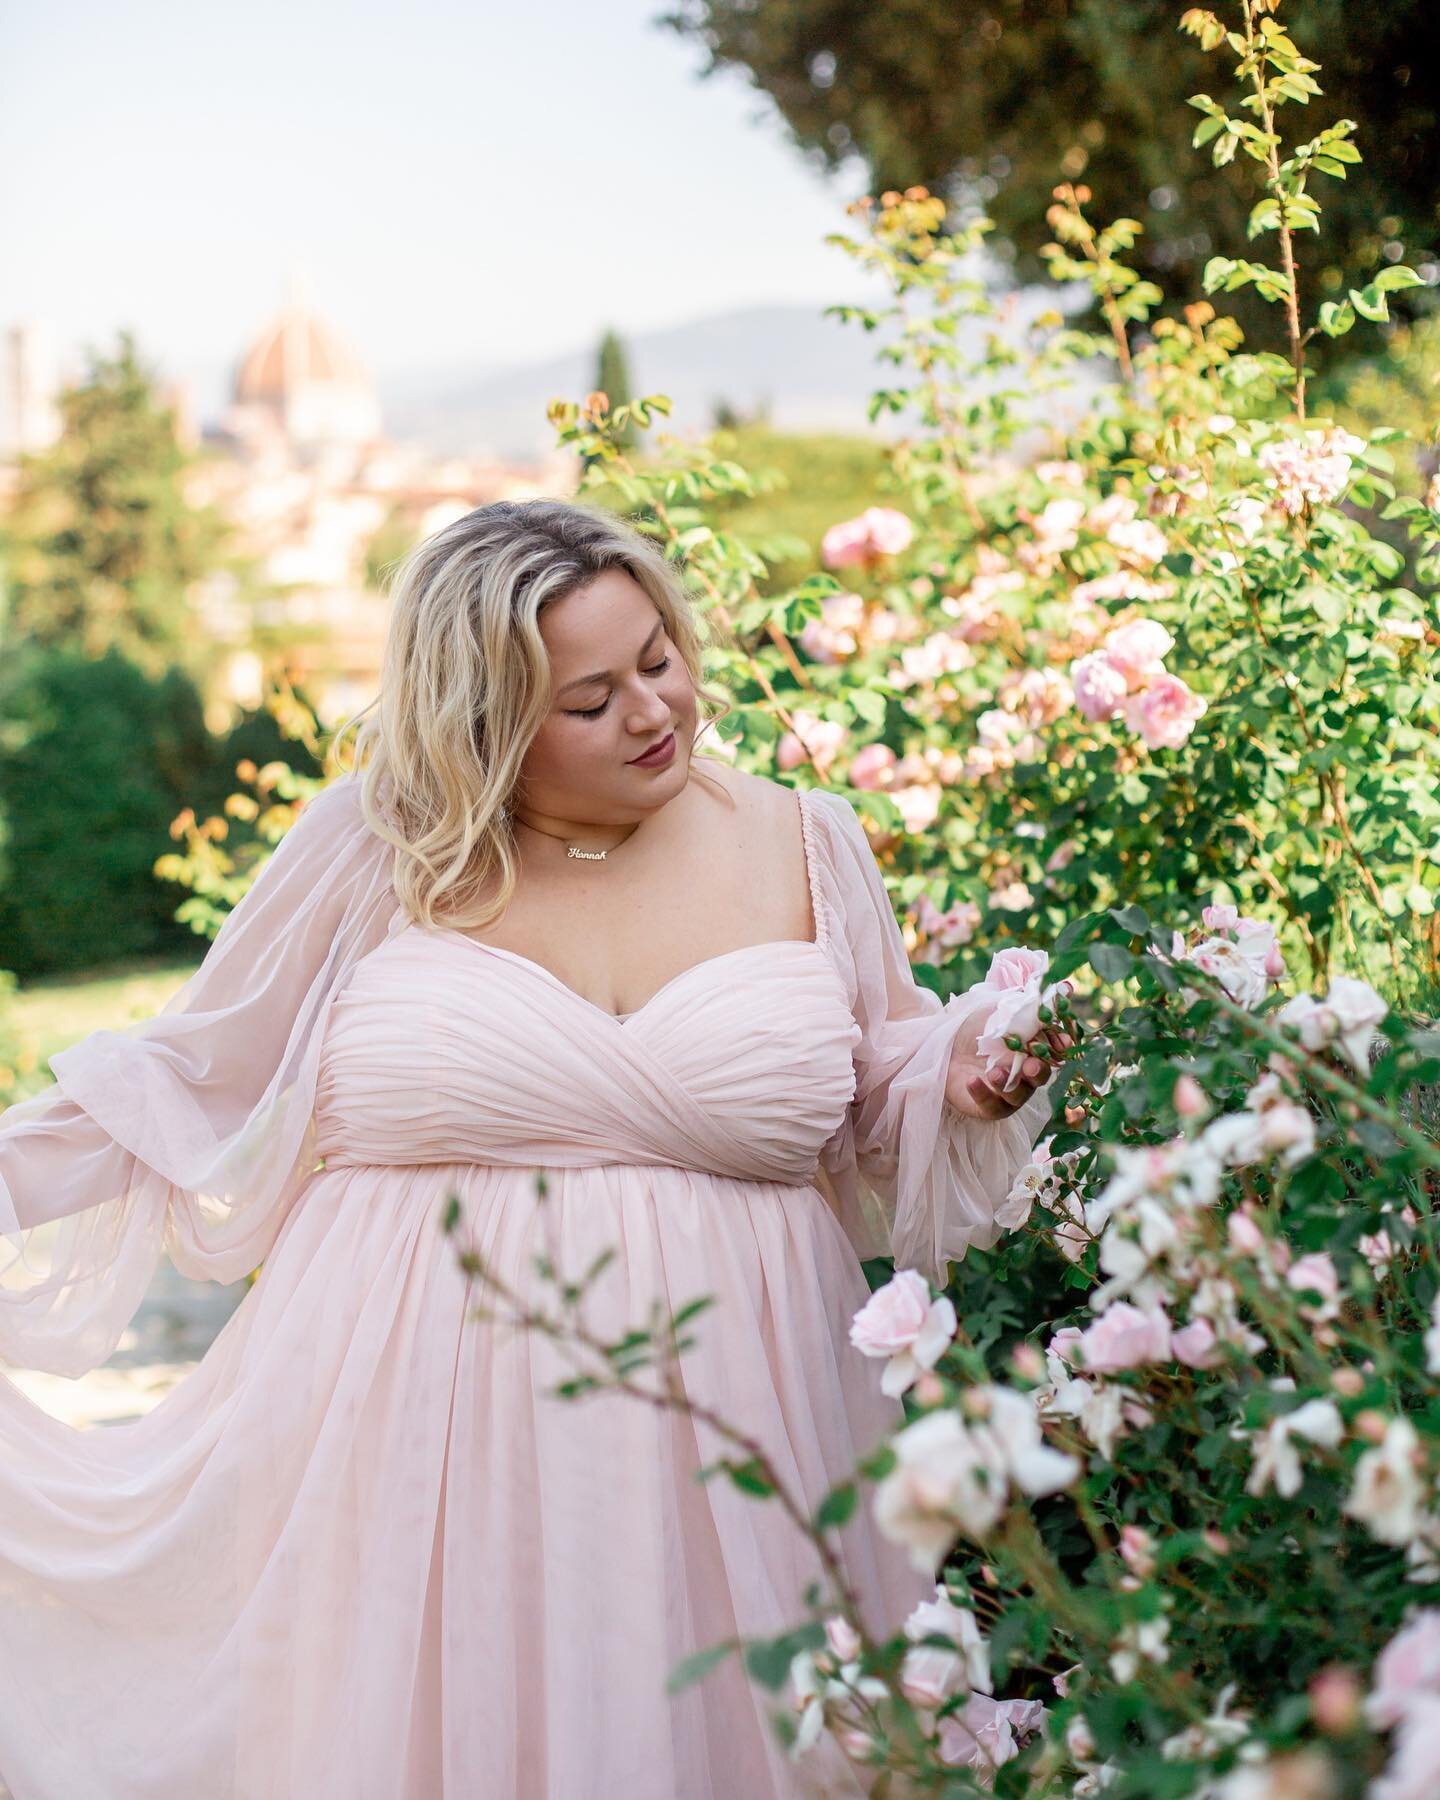 This time last year in an Italian rose garden&hellip; 🥰
⠀⠀⠀⠀⠀⠀⠀⠀⠀
Grateful that God speaks to me in ways that are personal. He knows what makes my heart come alive and shows up in those details. Overcome again by his kindness. 🩷
⠀⠀⠀⠀⠀⠀⠀⠀⠀
⠀⠀⠀⠀⠀⠀⠀⠀⠀